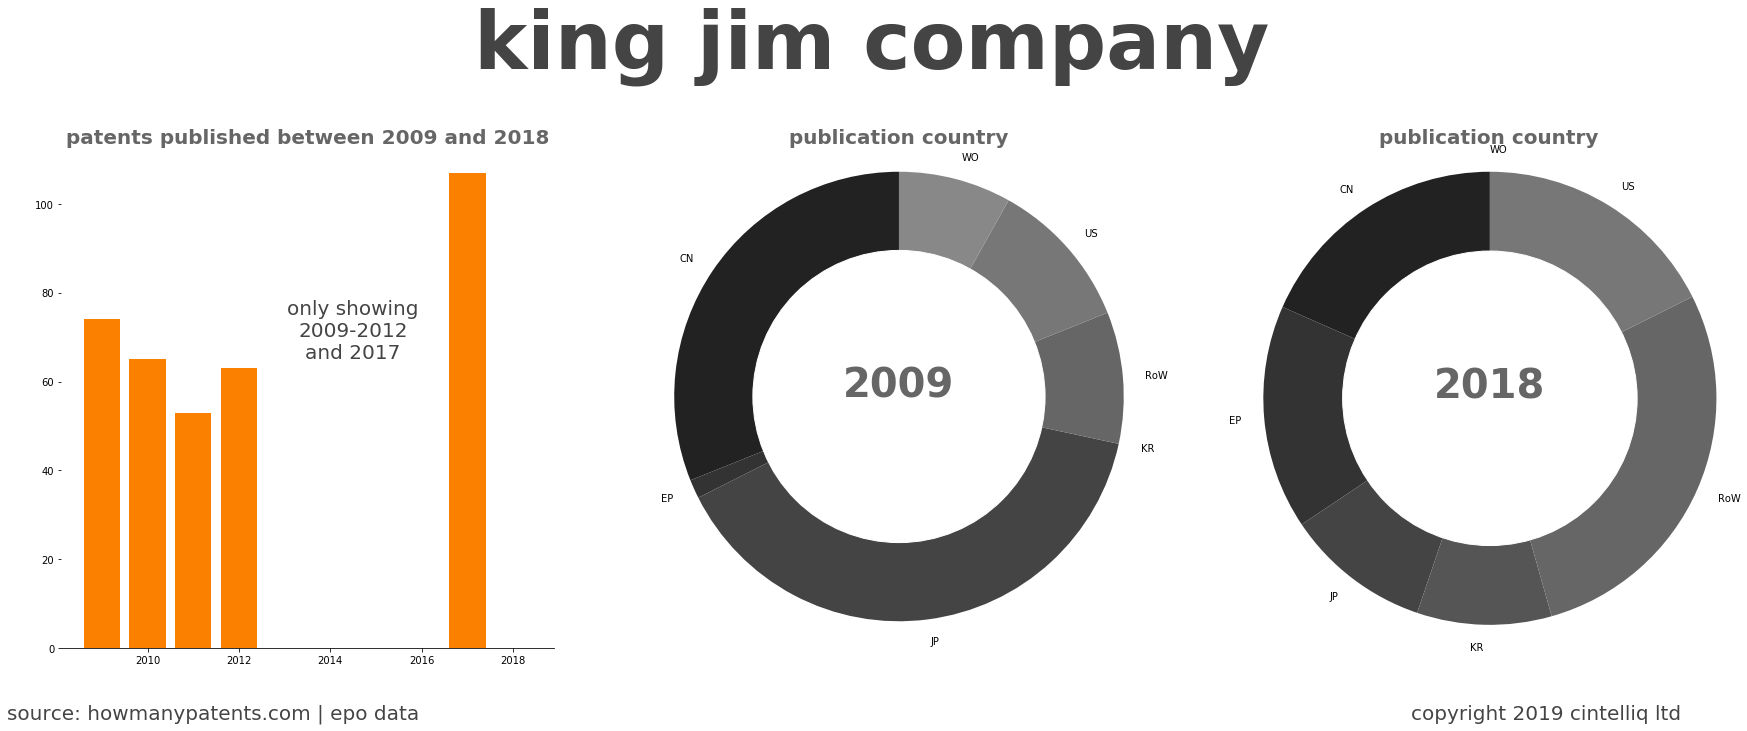 summary of patents for King Jim Company